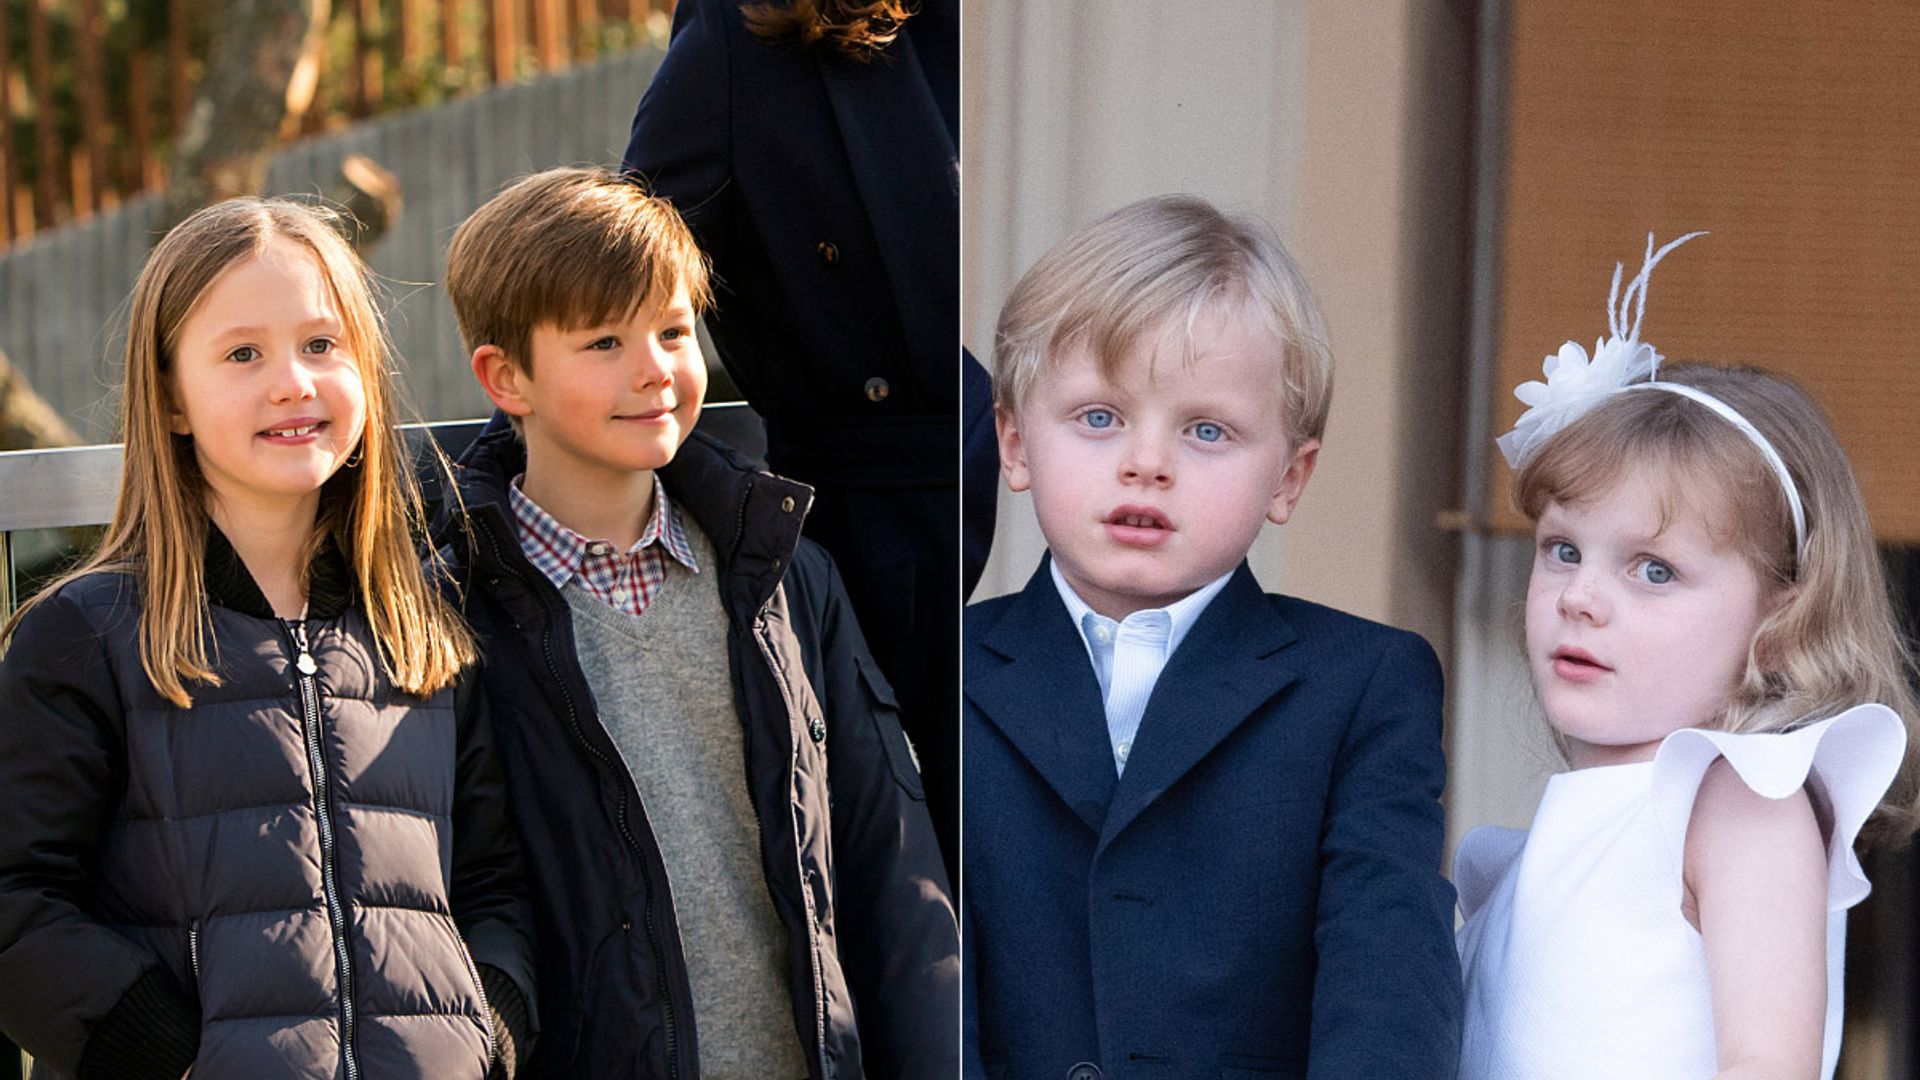 Royal kids: The regal twins that you might not know about